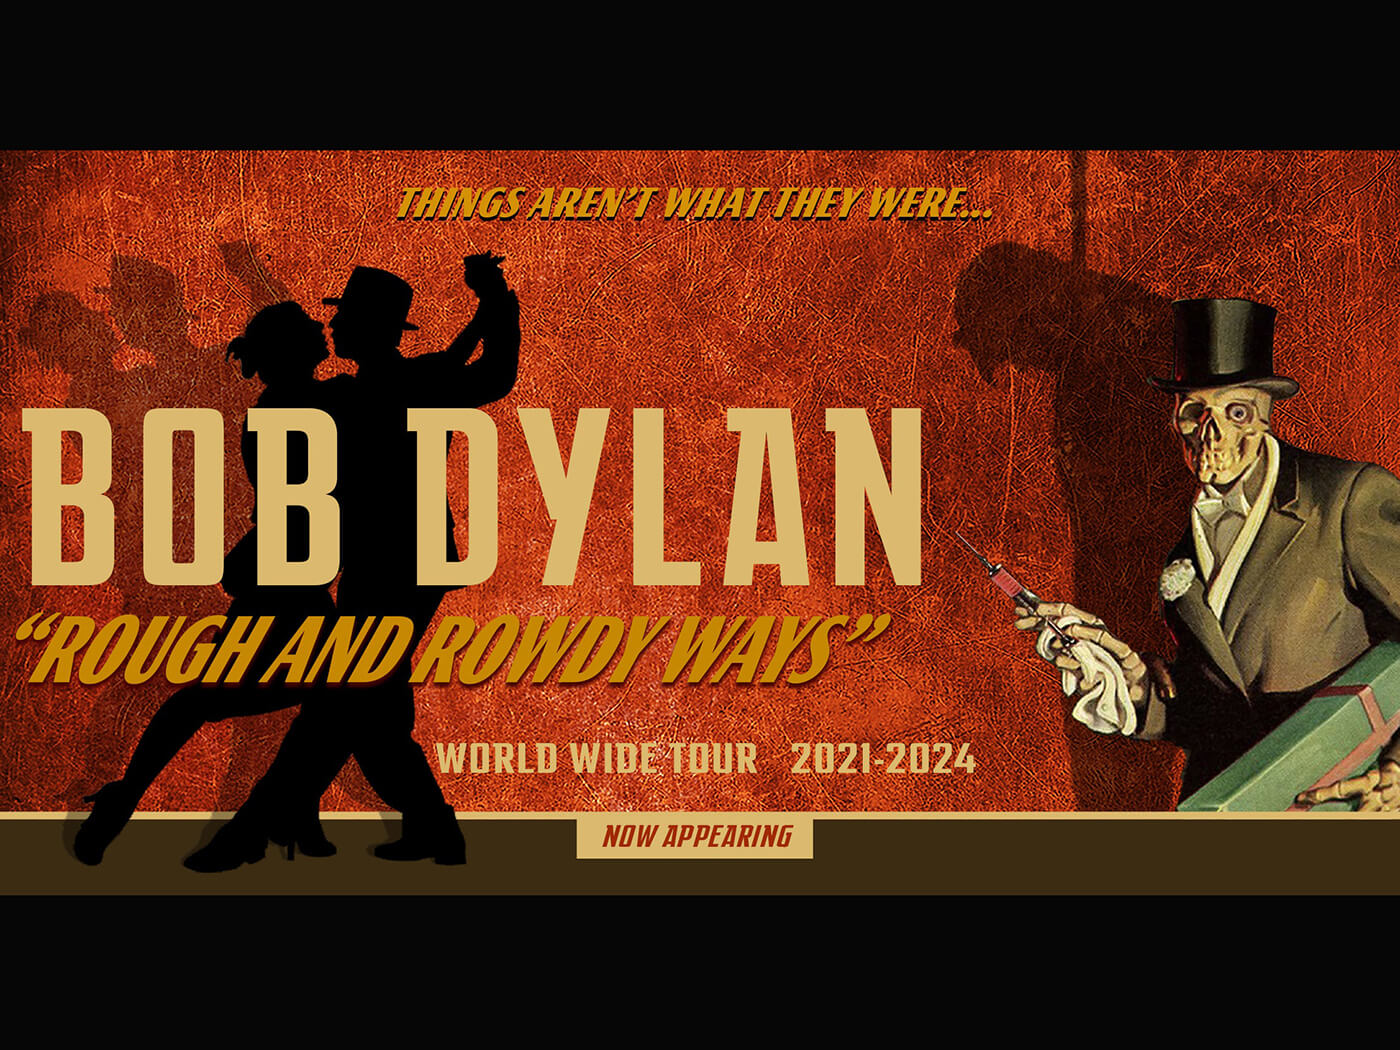 Bob Dylan’s Rough And Rowdy Ways Tour continues! Show 7: Berlin, Night 1